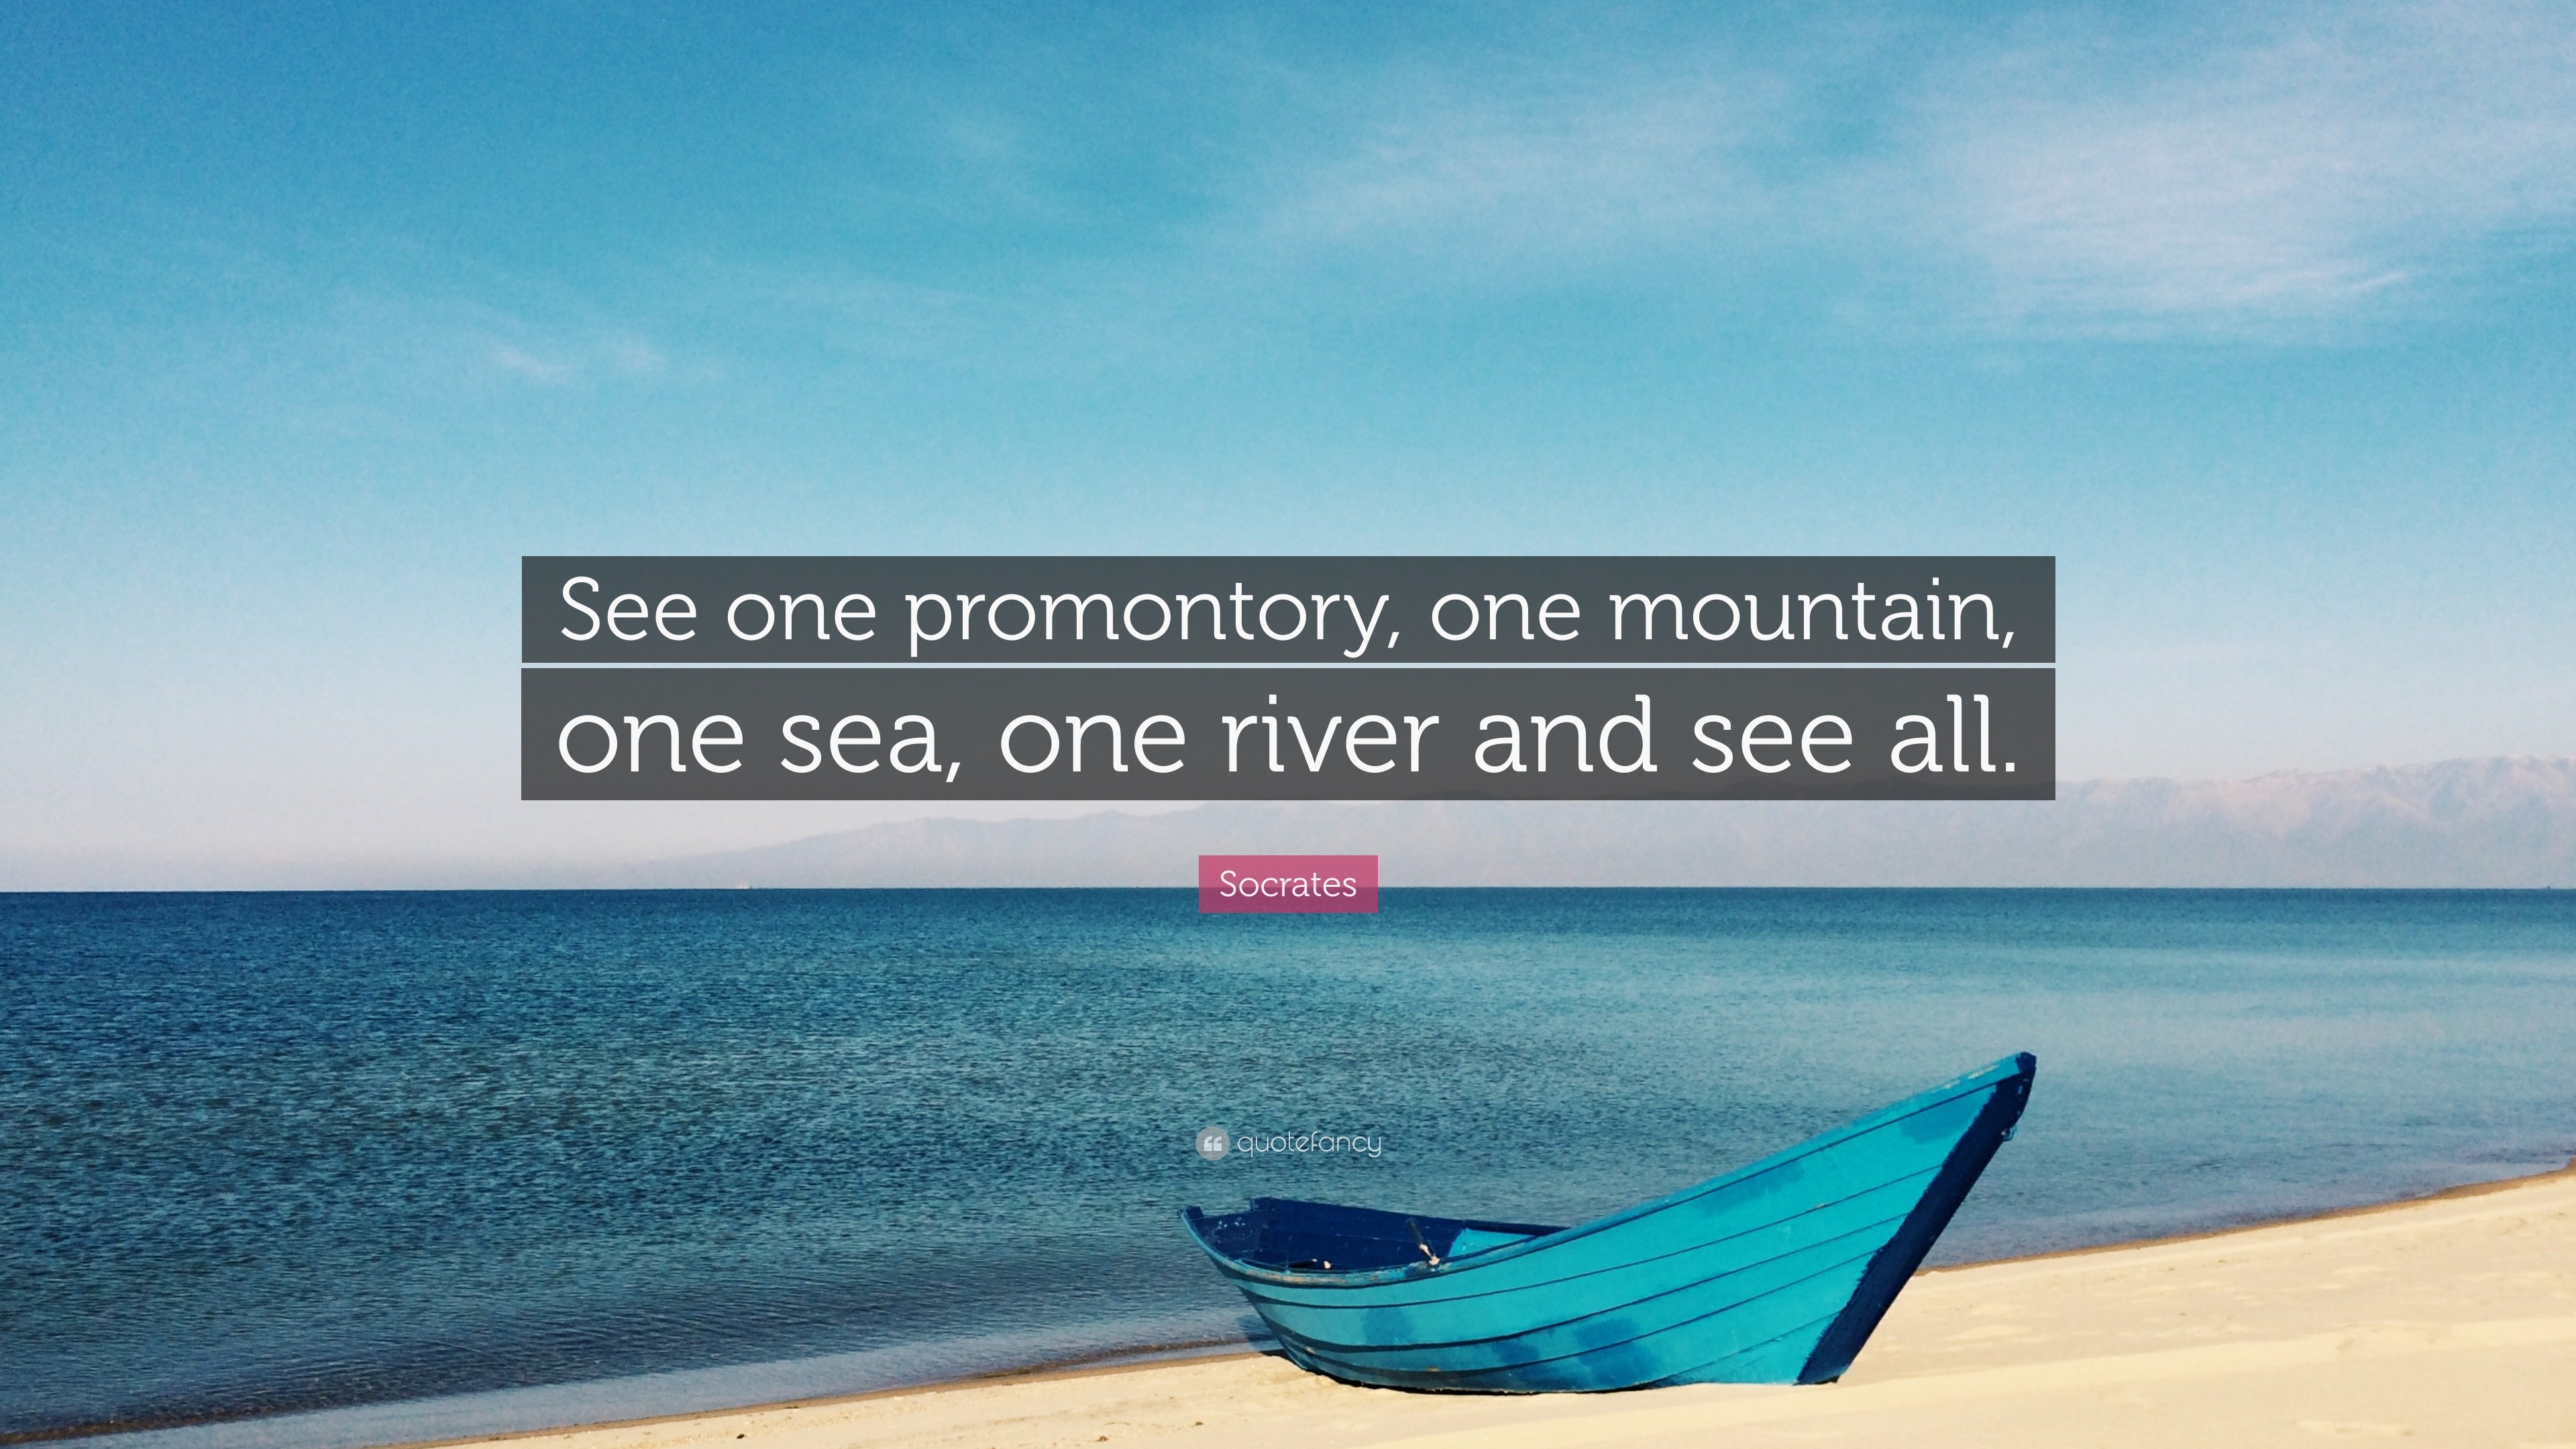 Socrates Quote: “See one promontory, one mountain, one sea, one river and see all.”